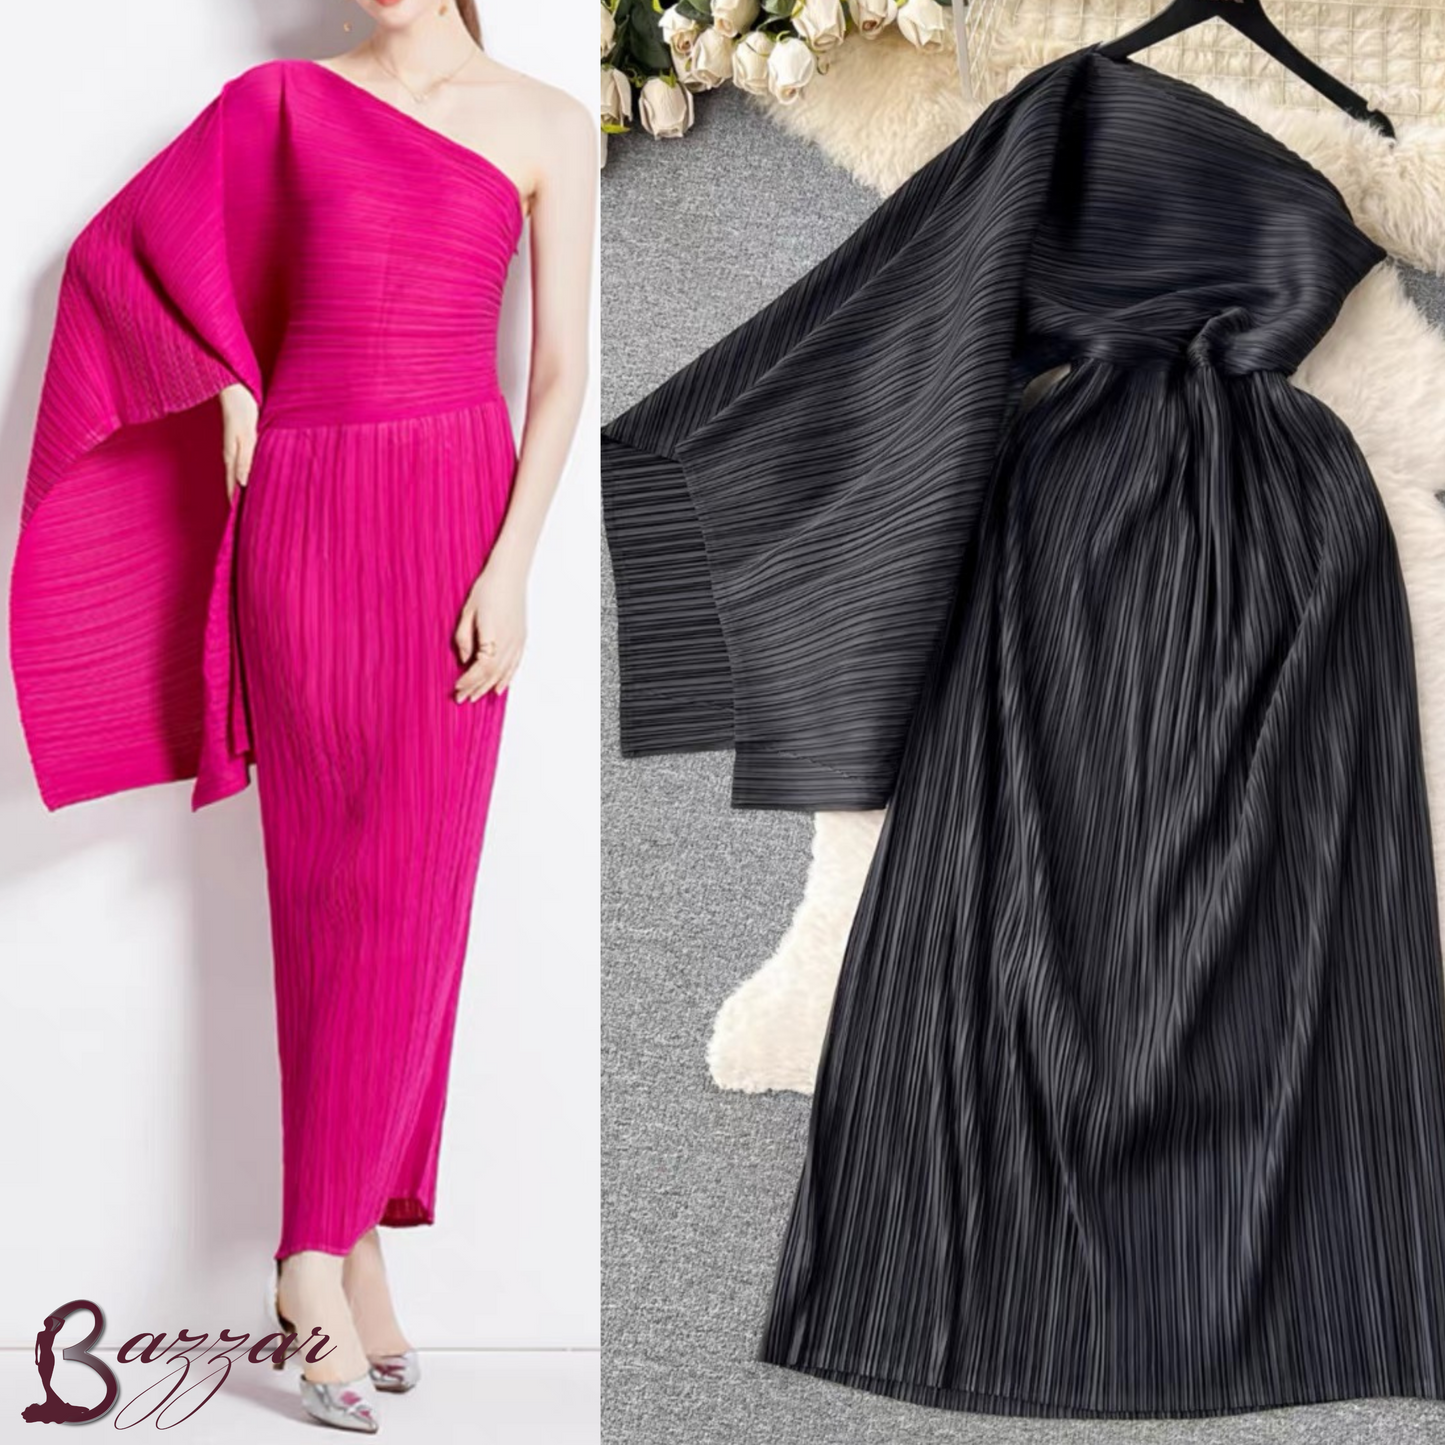 Dress - Pleated one shoulder